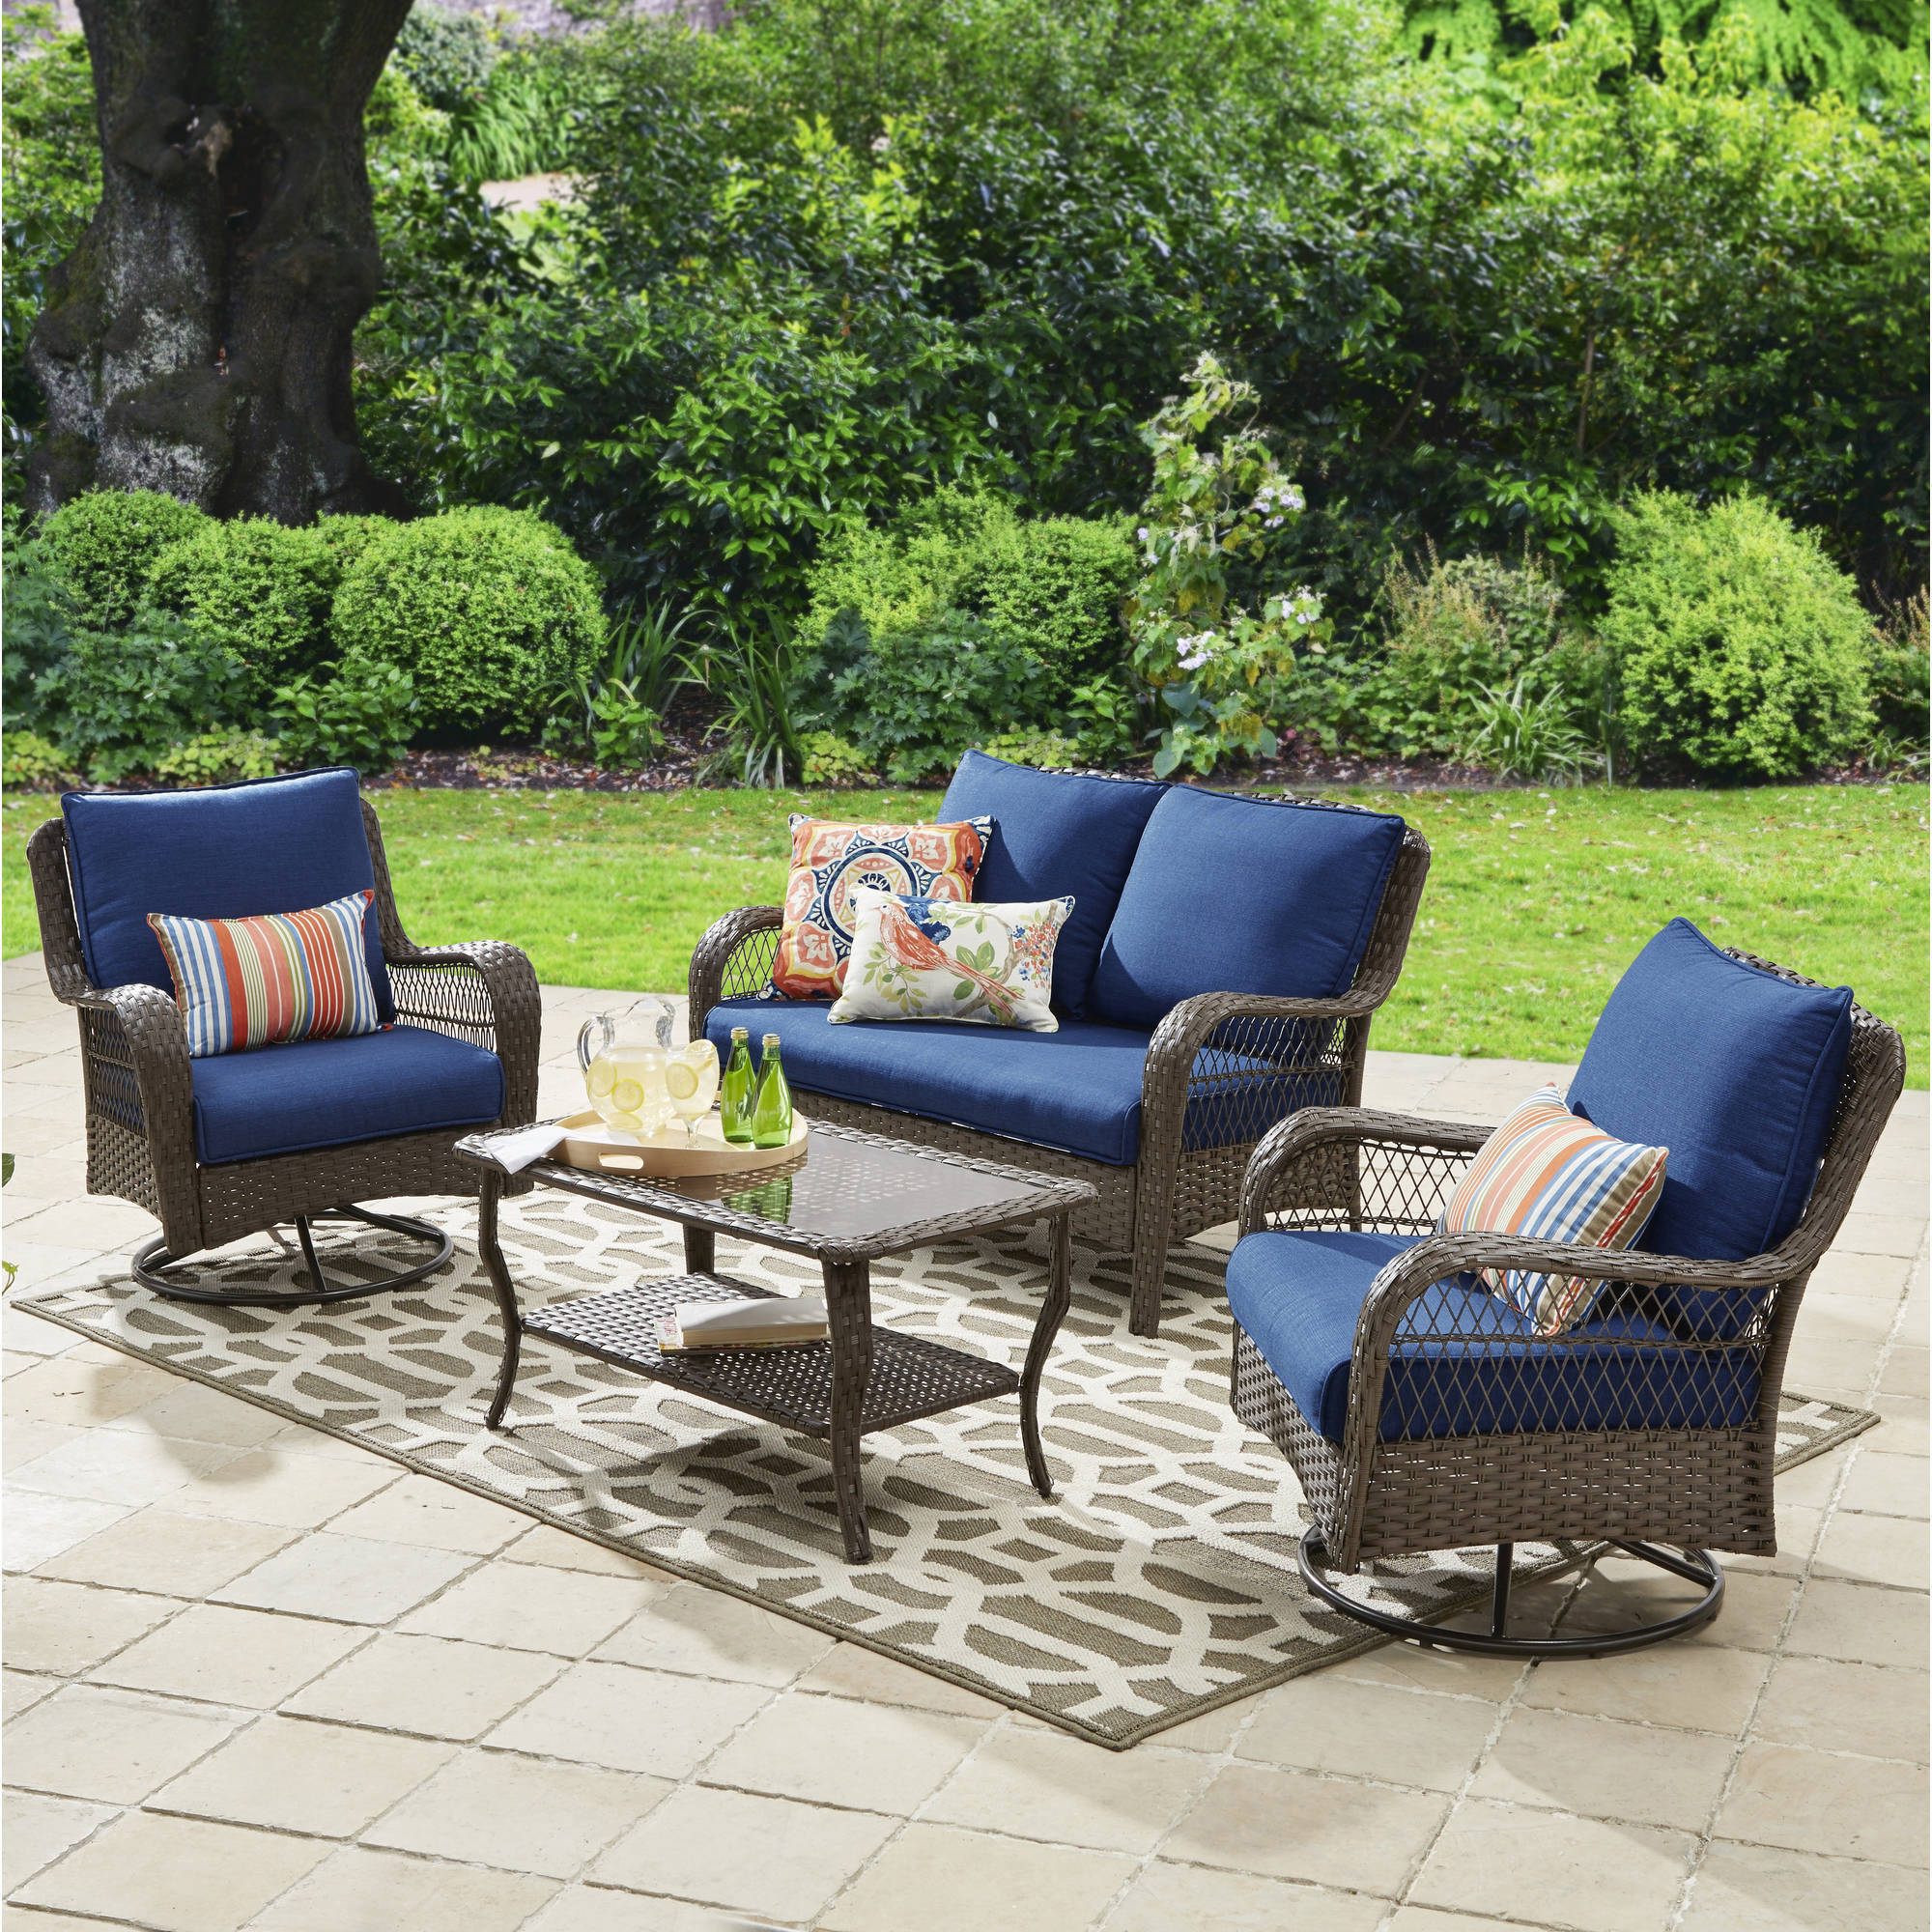 Art Van Outdoor Furniture for Perfect Patio Furnitures Ideas | Roy Home